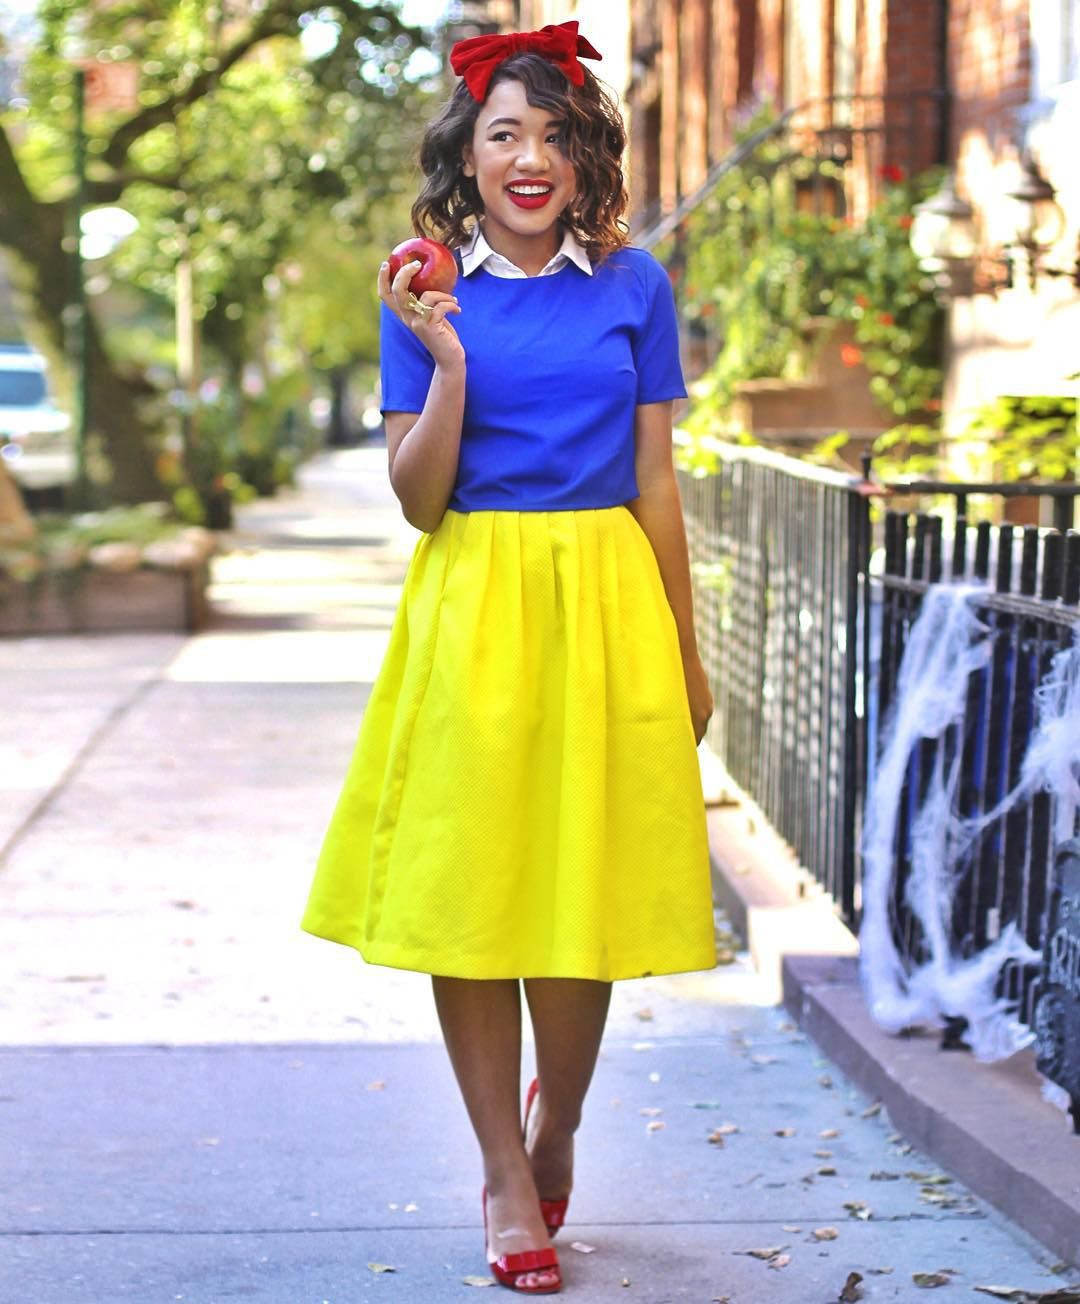 Snow White Costumes DIY
 Your Favorite Bloggers Halloween Costumes Are Their Best